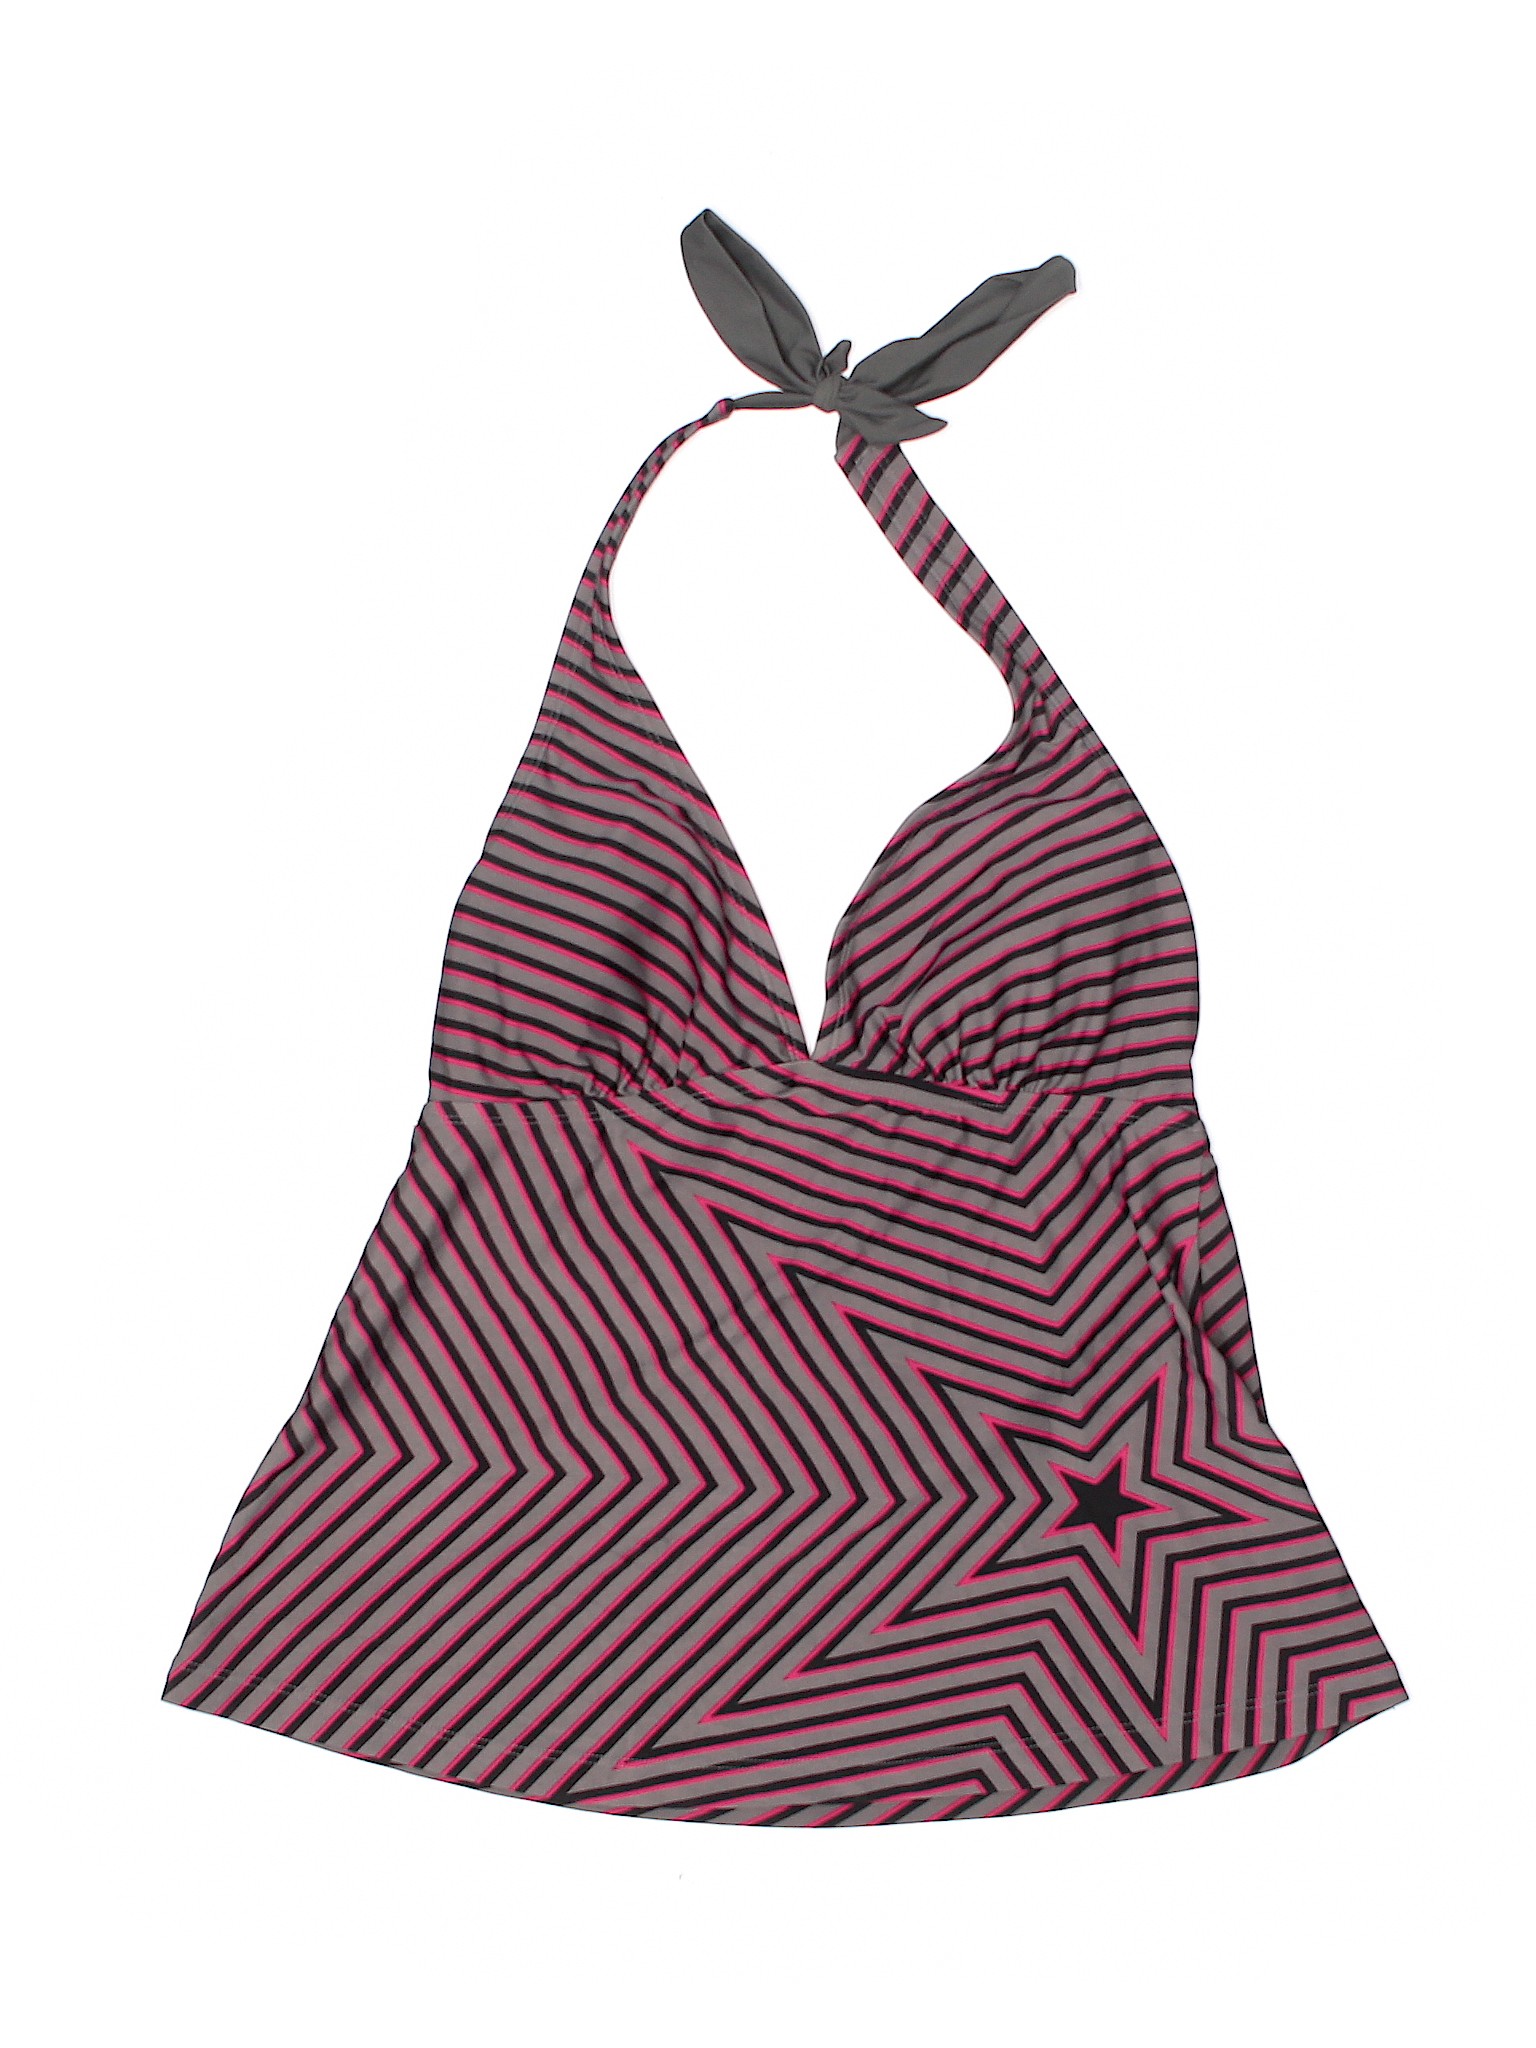 converse one star swimsuit